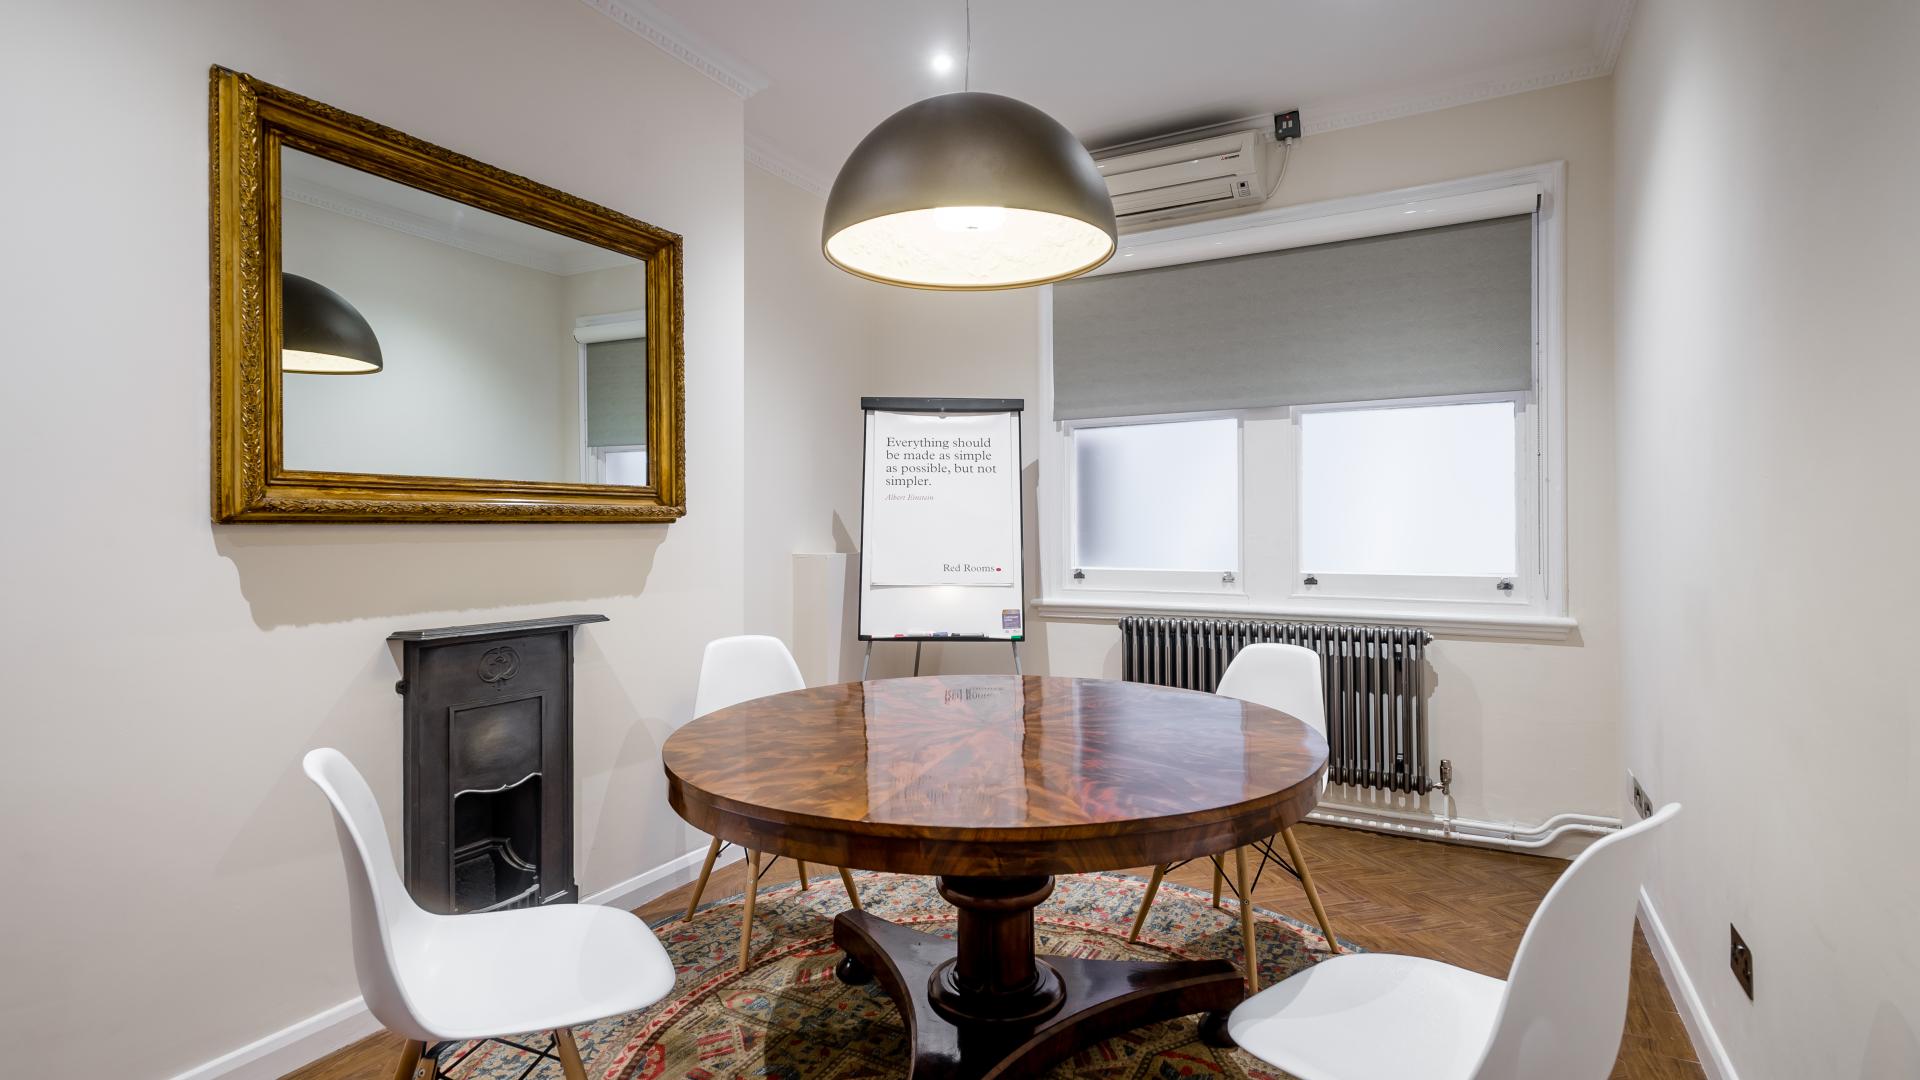 Meeting Rooms for Hire in Reading